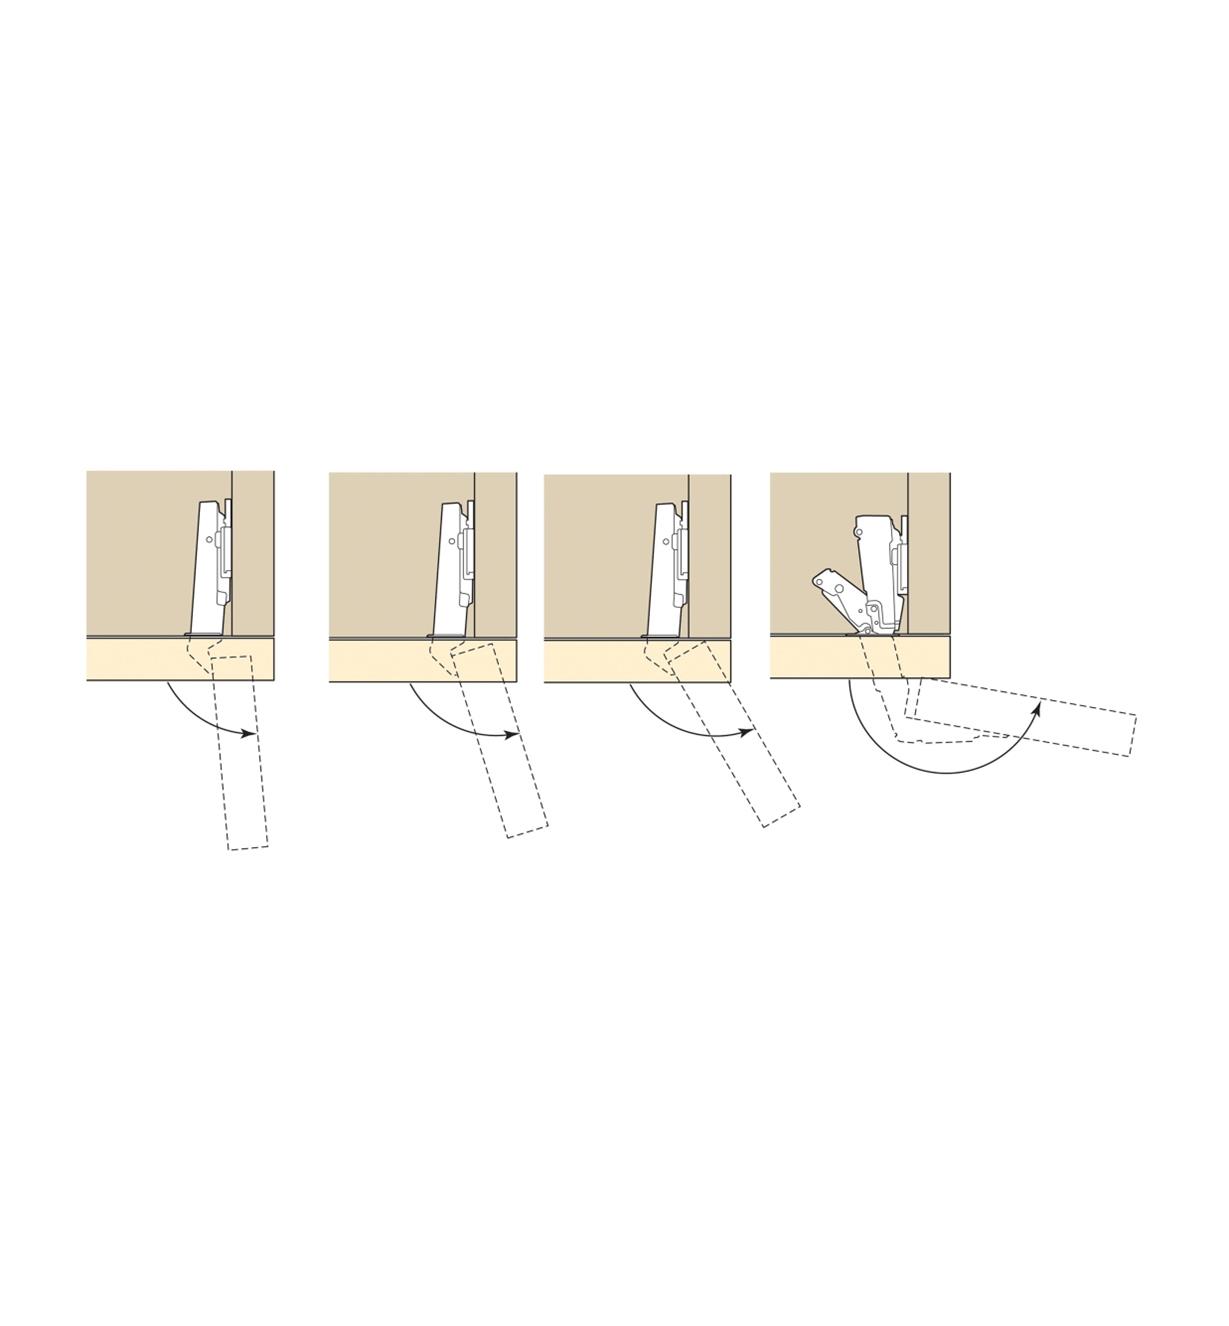 Diagram shows opening range of various Clip-Top Hinges